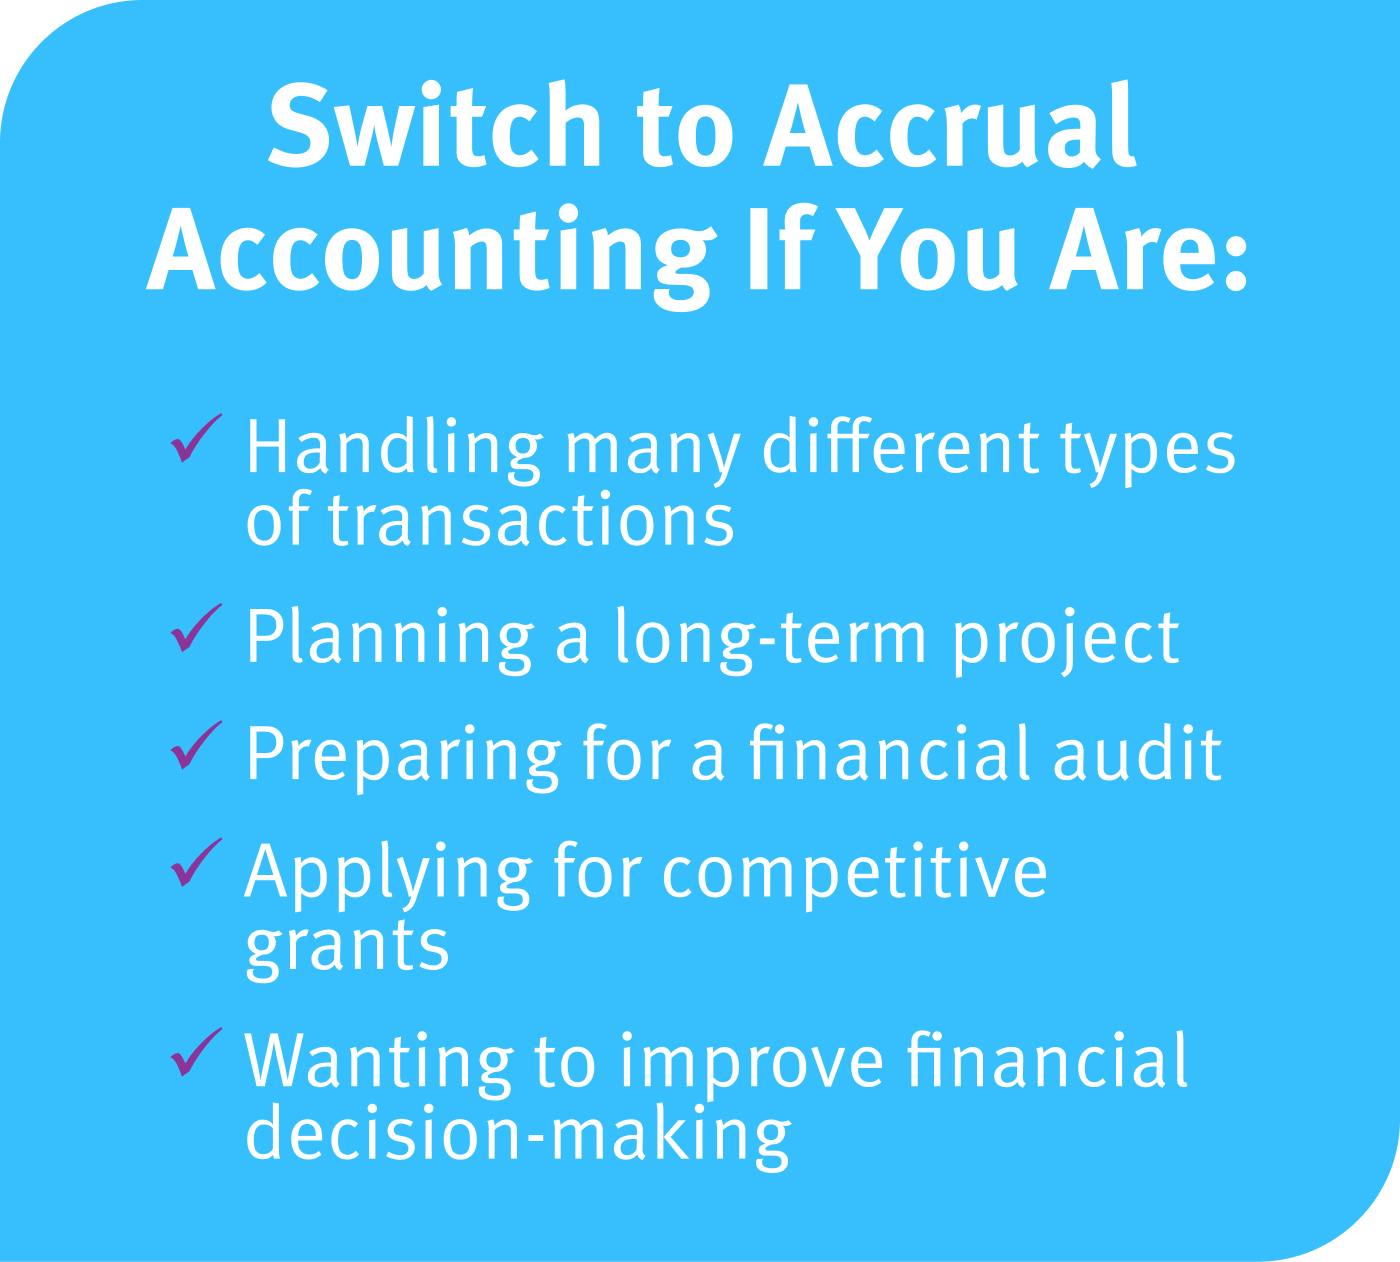 A checklist of signs to switch from cash accounting to accrual accounting